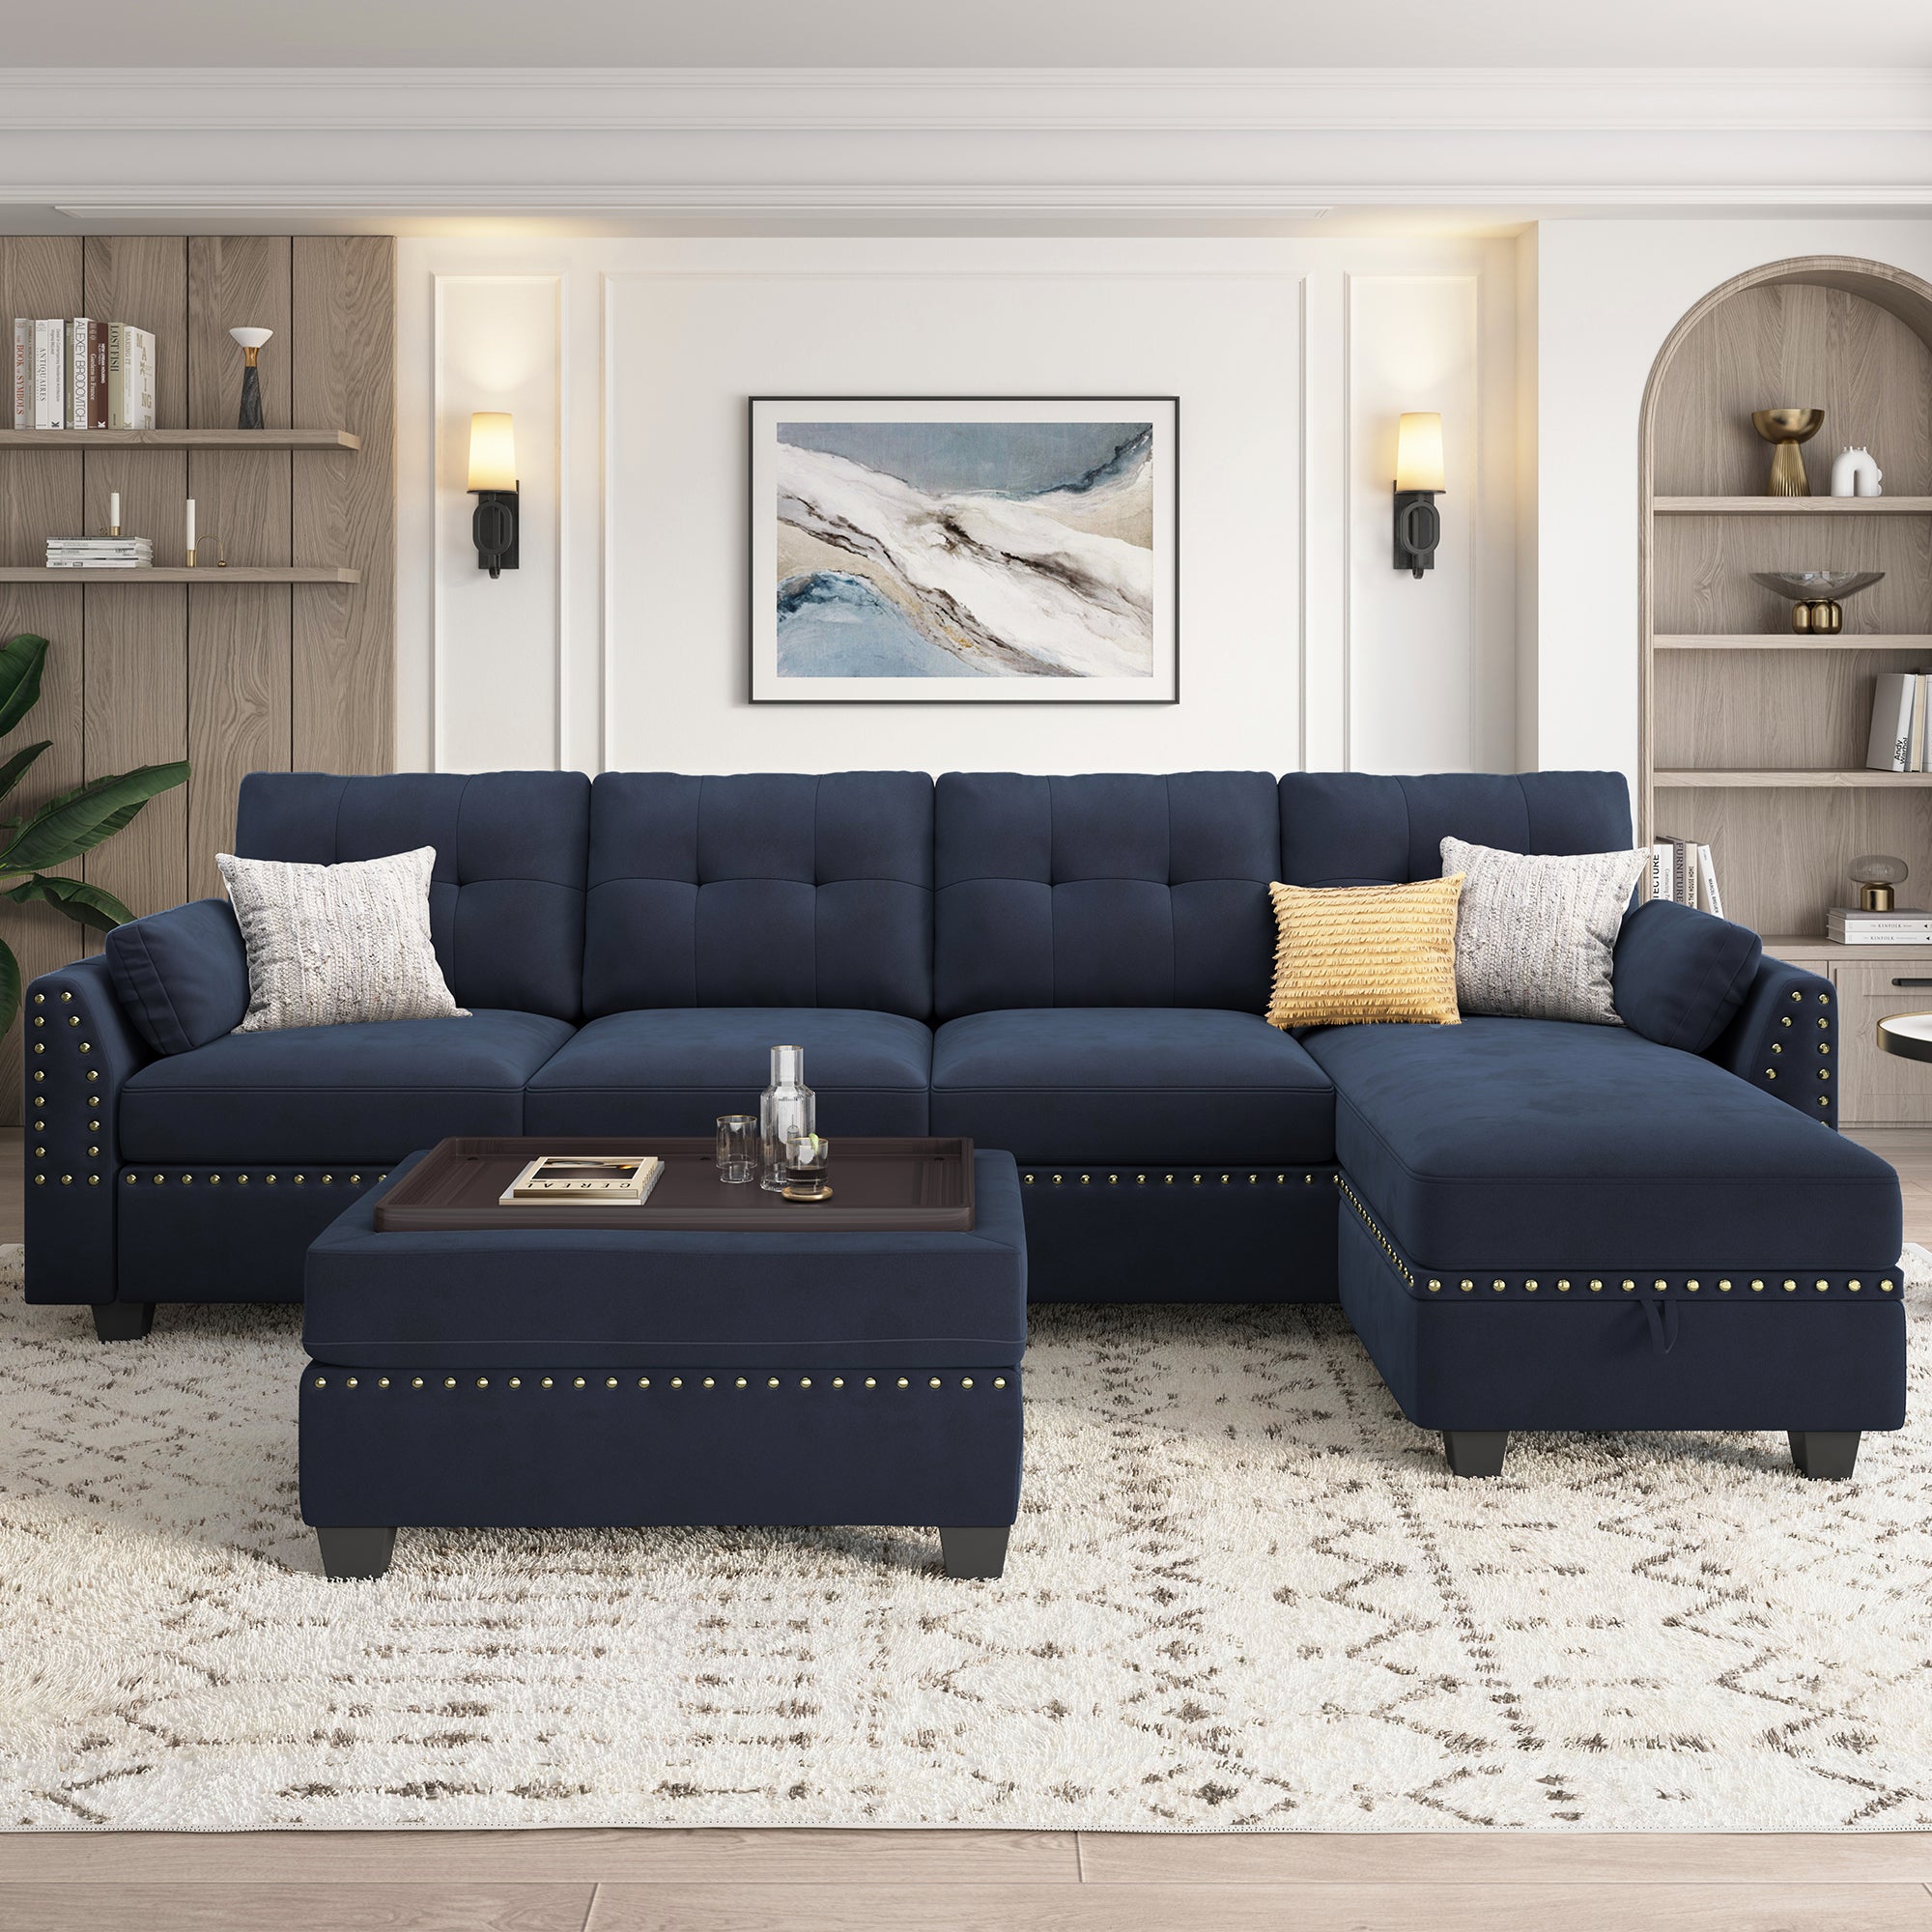 HONBAY Velvet 4-Seat L-Shaped Sectional Sofa with Table Ottoman Set